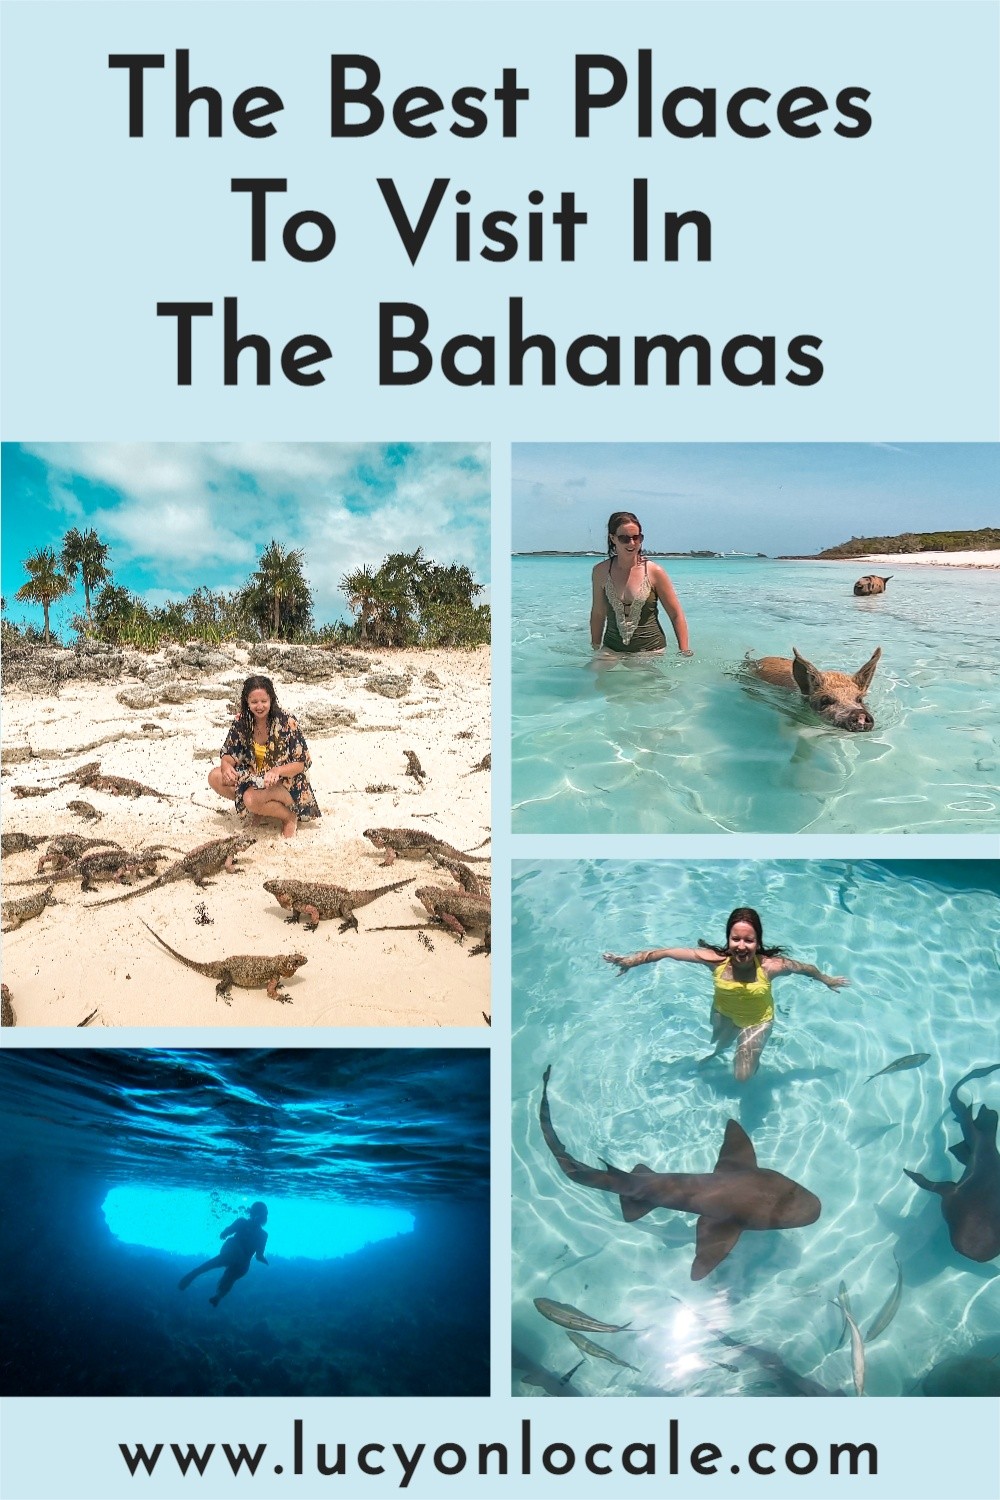 The best places to visit in The Bahamas